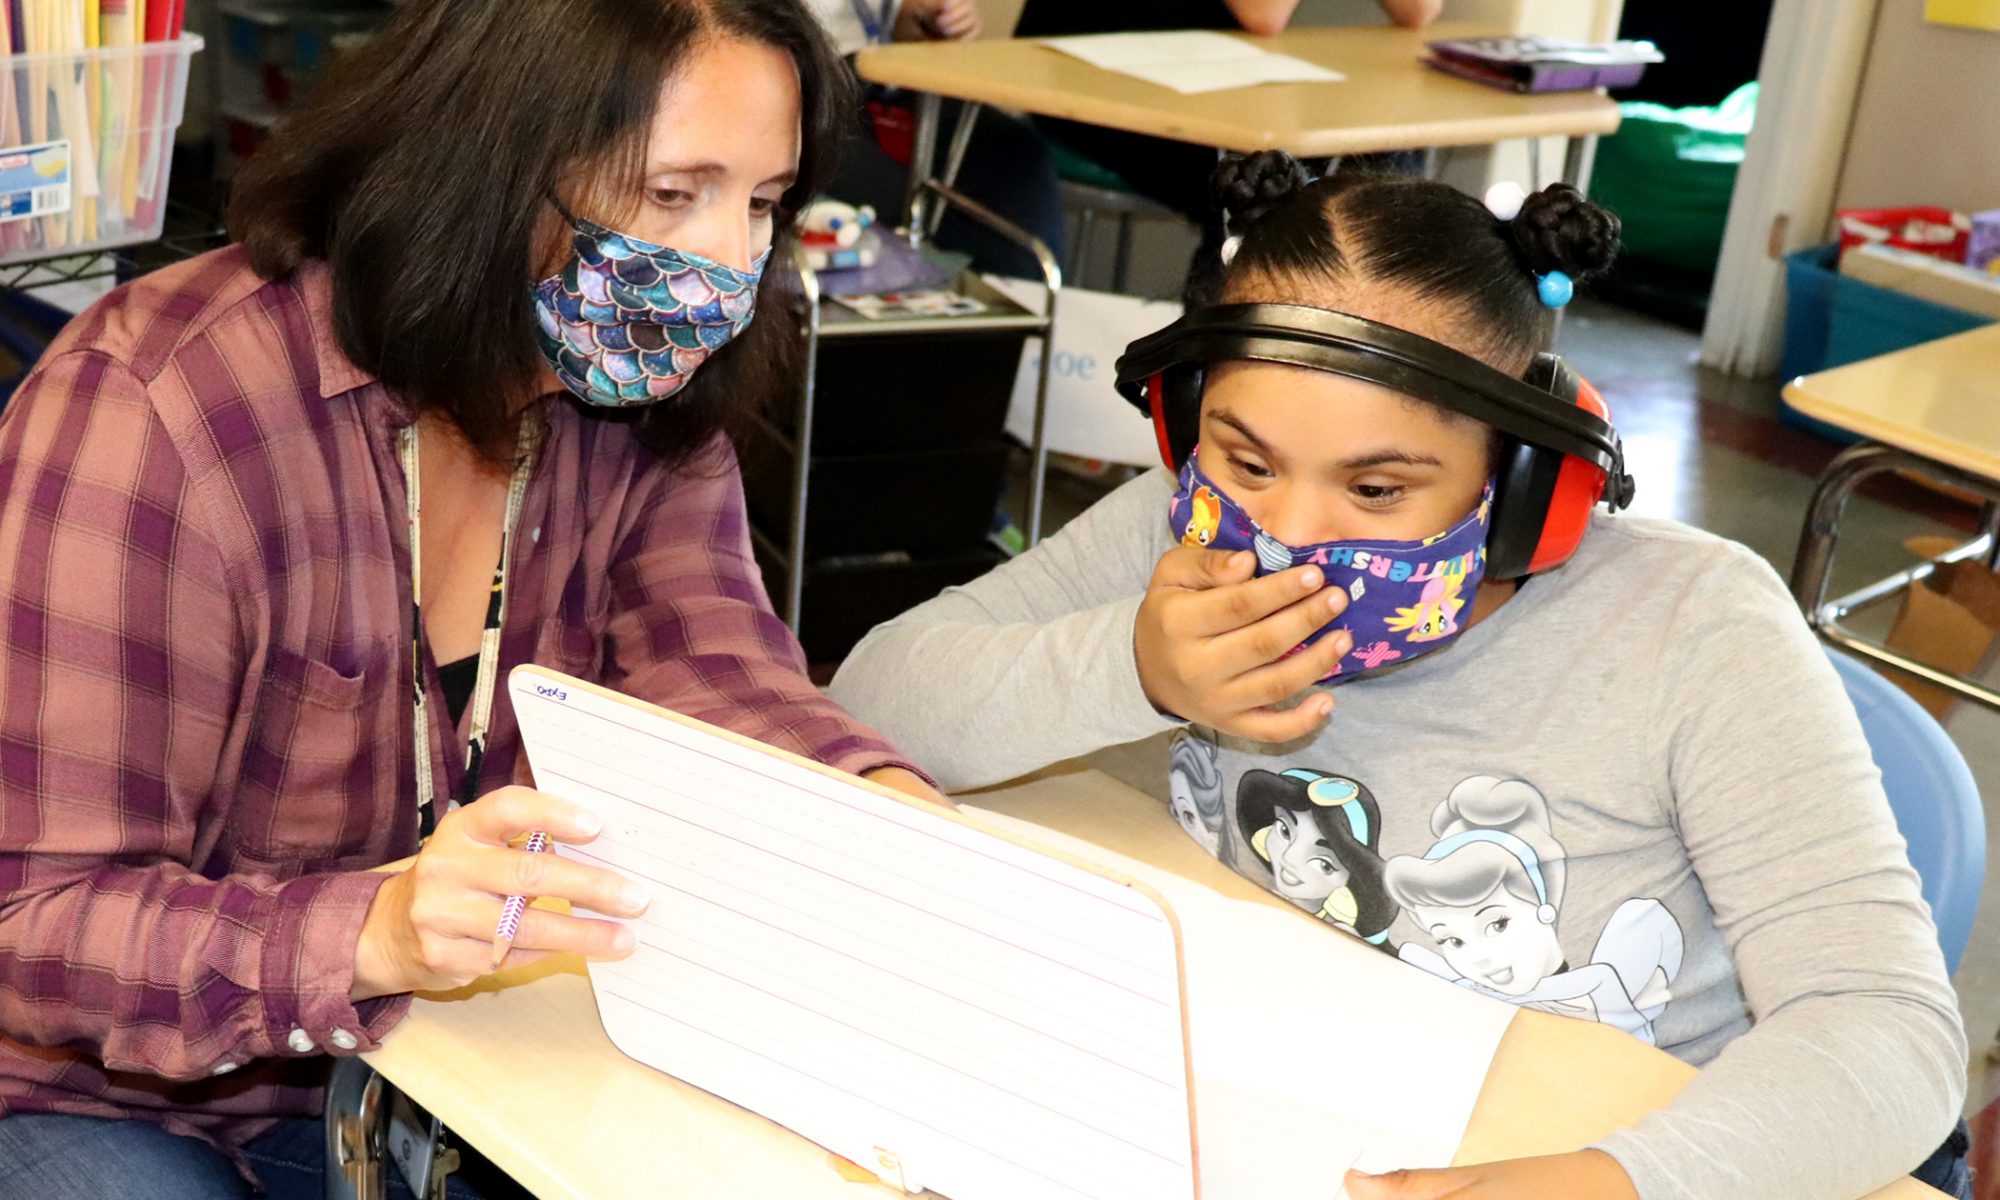 A teacher wearing a rust and orange plaid shirt and blue patterned protective face covering and a student wearing a sound muffling headset, protective purple patterned face covering and grey shirt work together on a Chromebook in a Capital Region BOCES special education classroom.